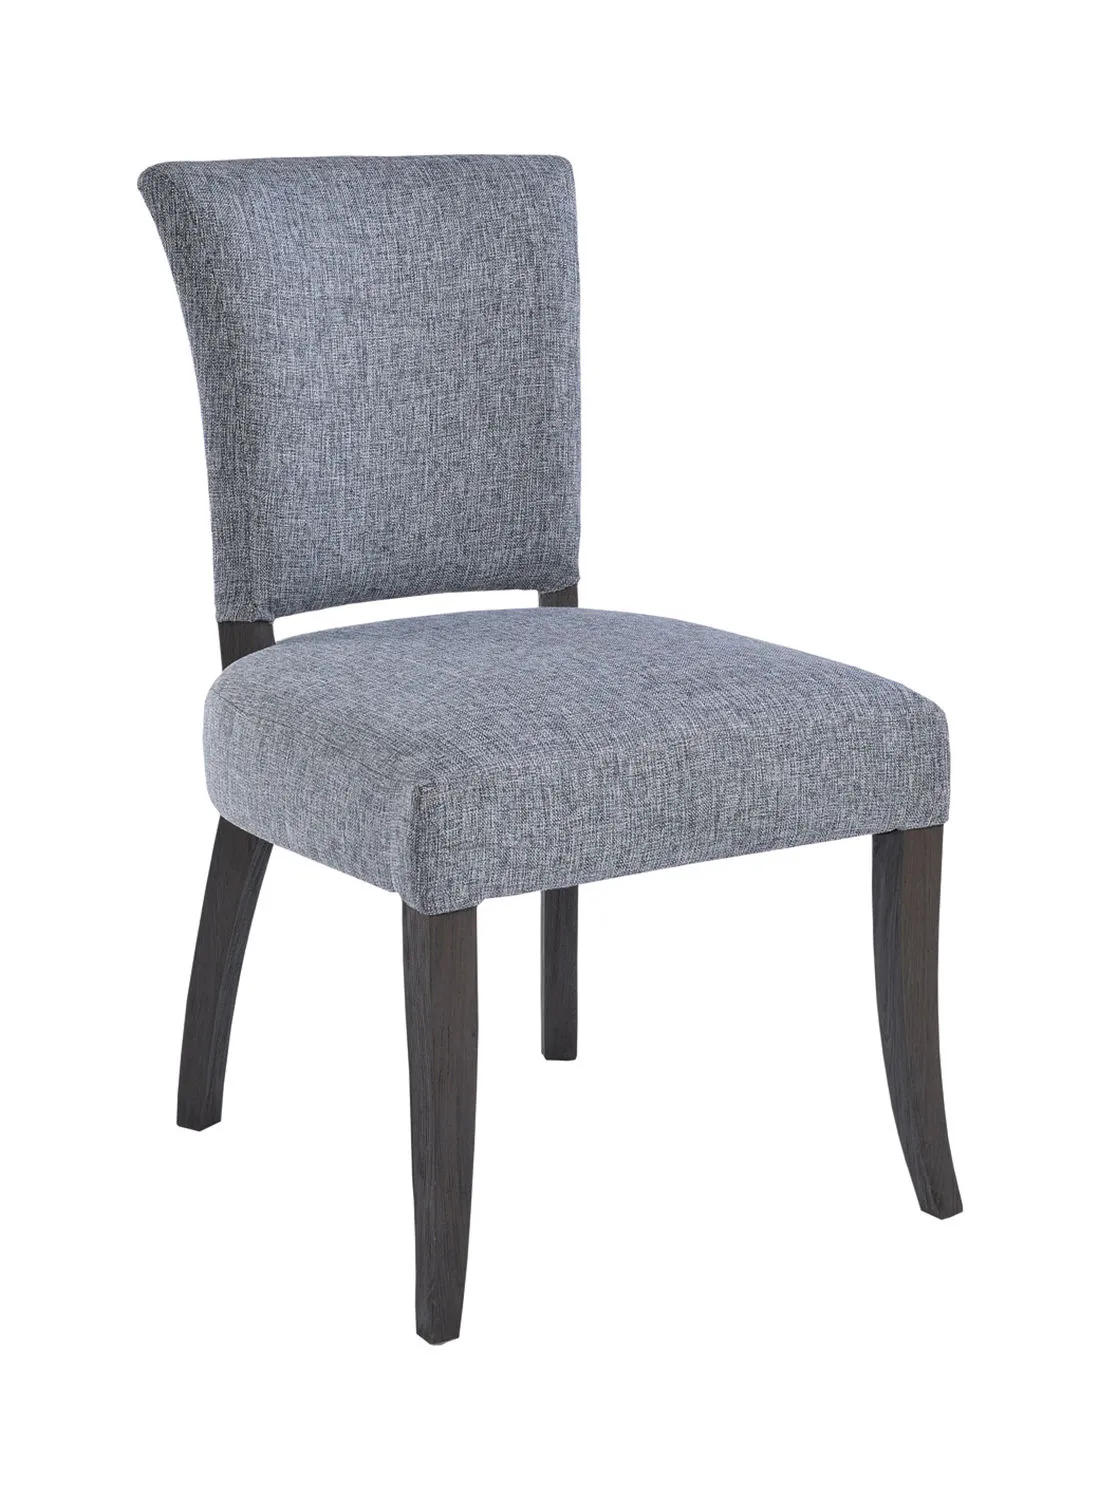 ebb & flow Dining Chair Luxurious - In Oak/Grey Wooden Chair Size 51 X 62 X 89